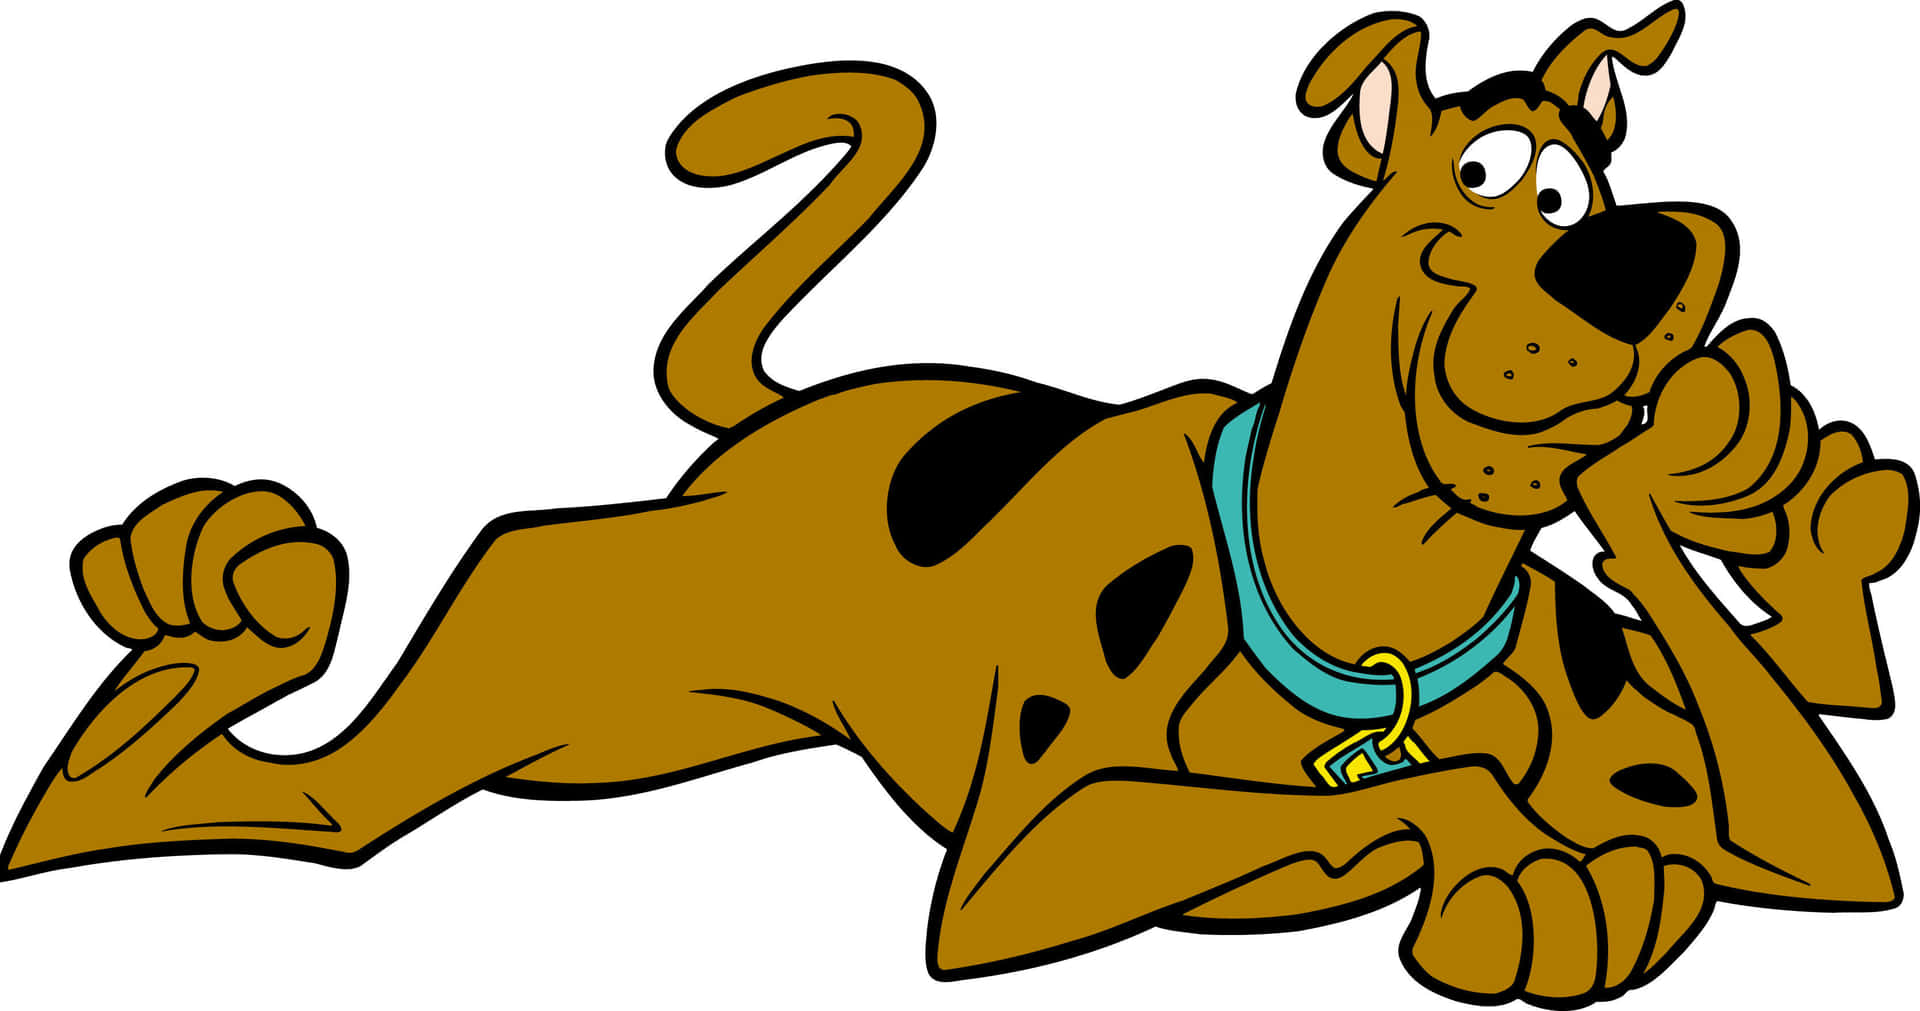 Scooby Doo in all his glory